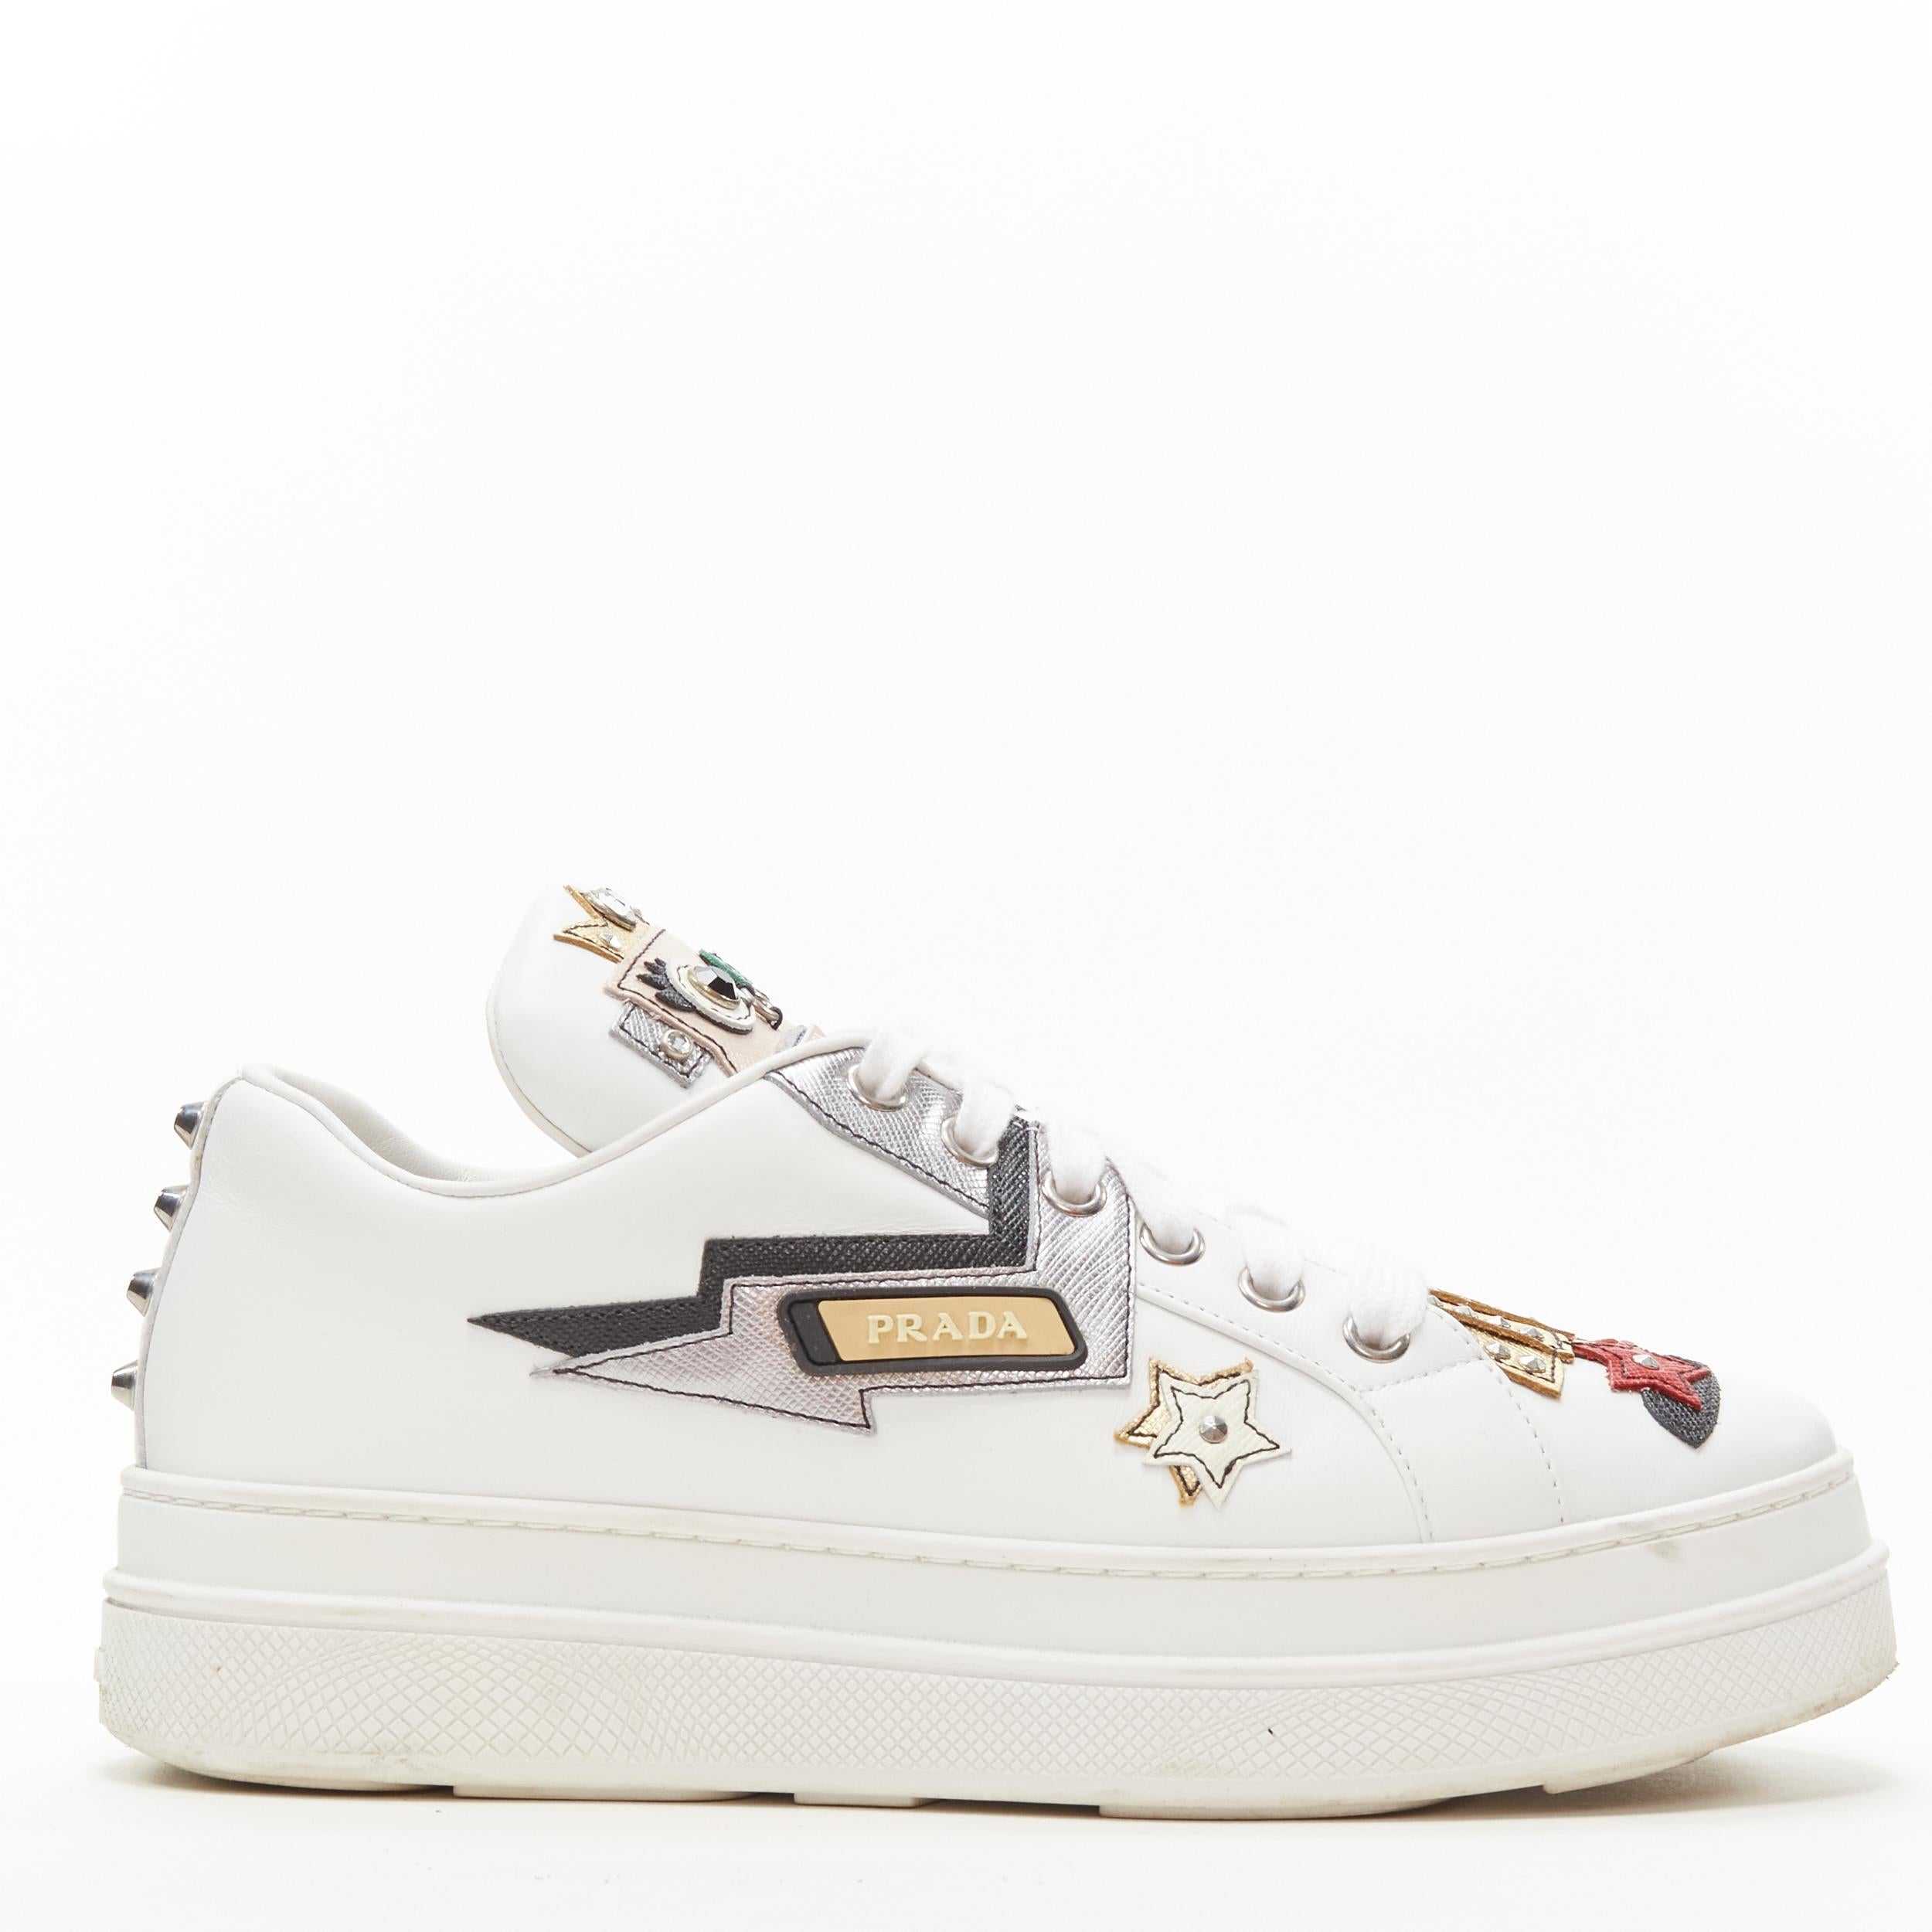 PRADA Robot Queen patchwork embellished white platform sneaker EU36 
Reference: ANWU/A00366 
Brand: Prada 
Designer: Miuccia Prada 
Collection: Robot 
Material: Leather 
Color: White 
Pattern: Solid 
Closure: Lace 
Extra Detail: Robot wear crown